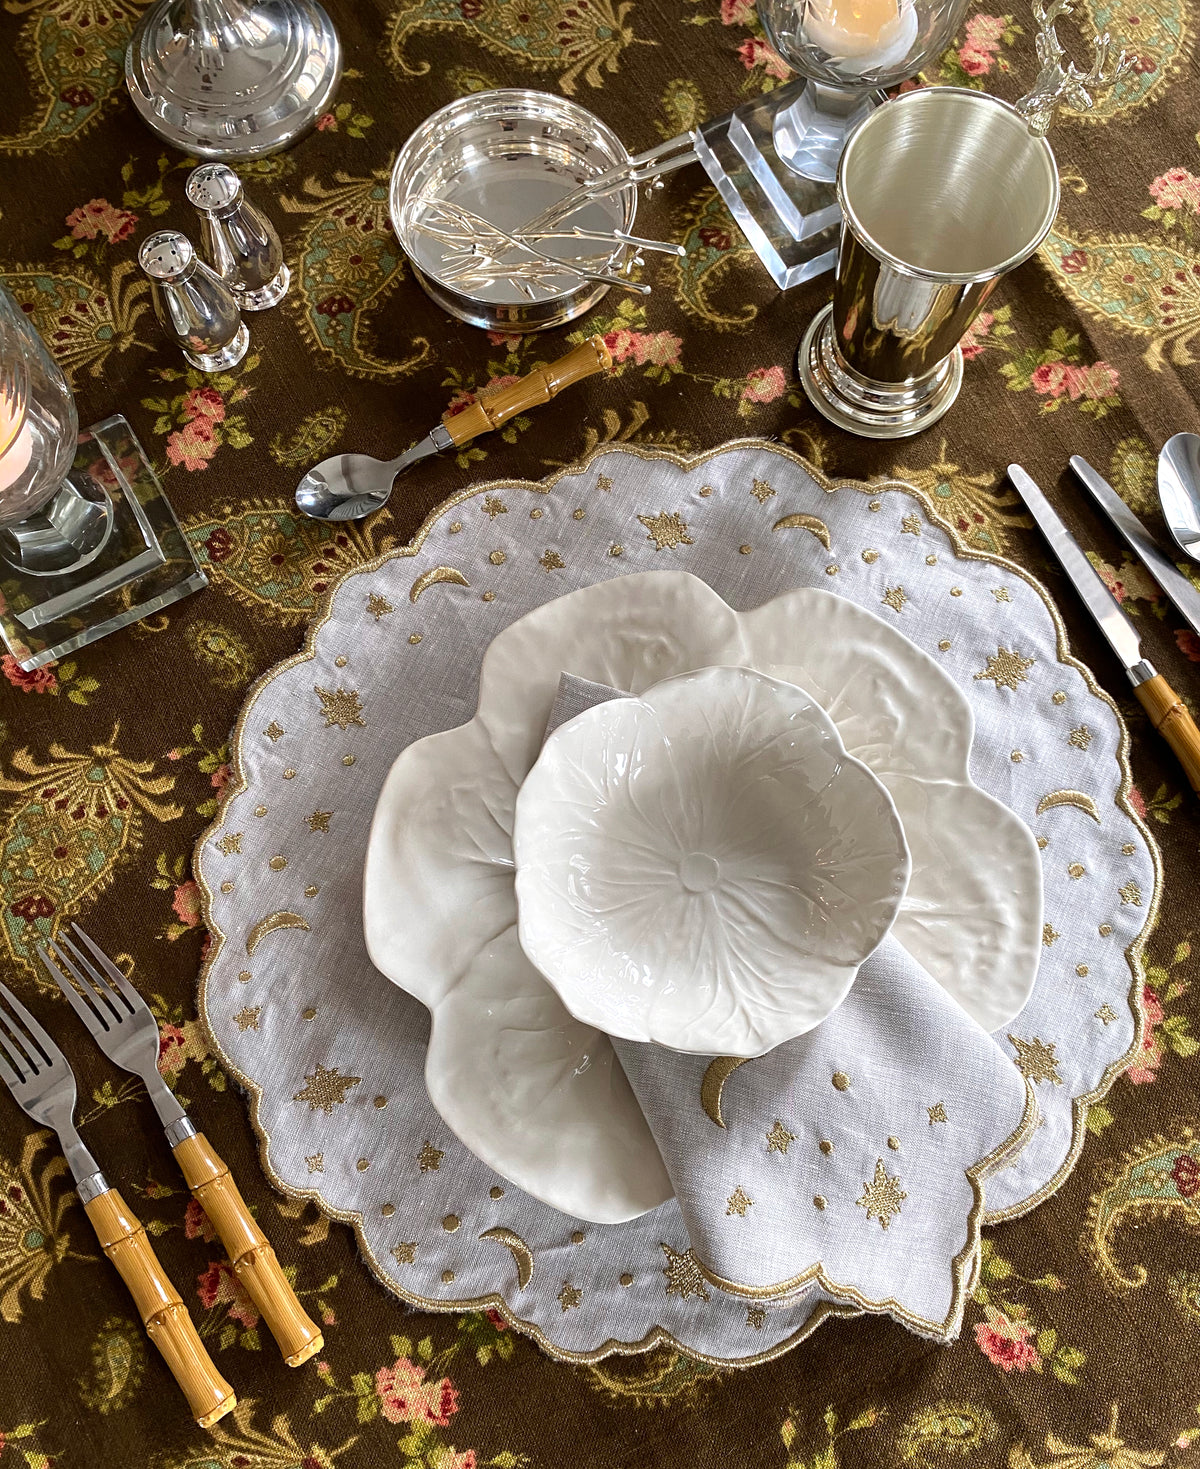 The Astral Linen Placemat in White Linen and Gold Embroidery